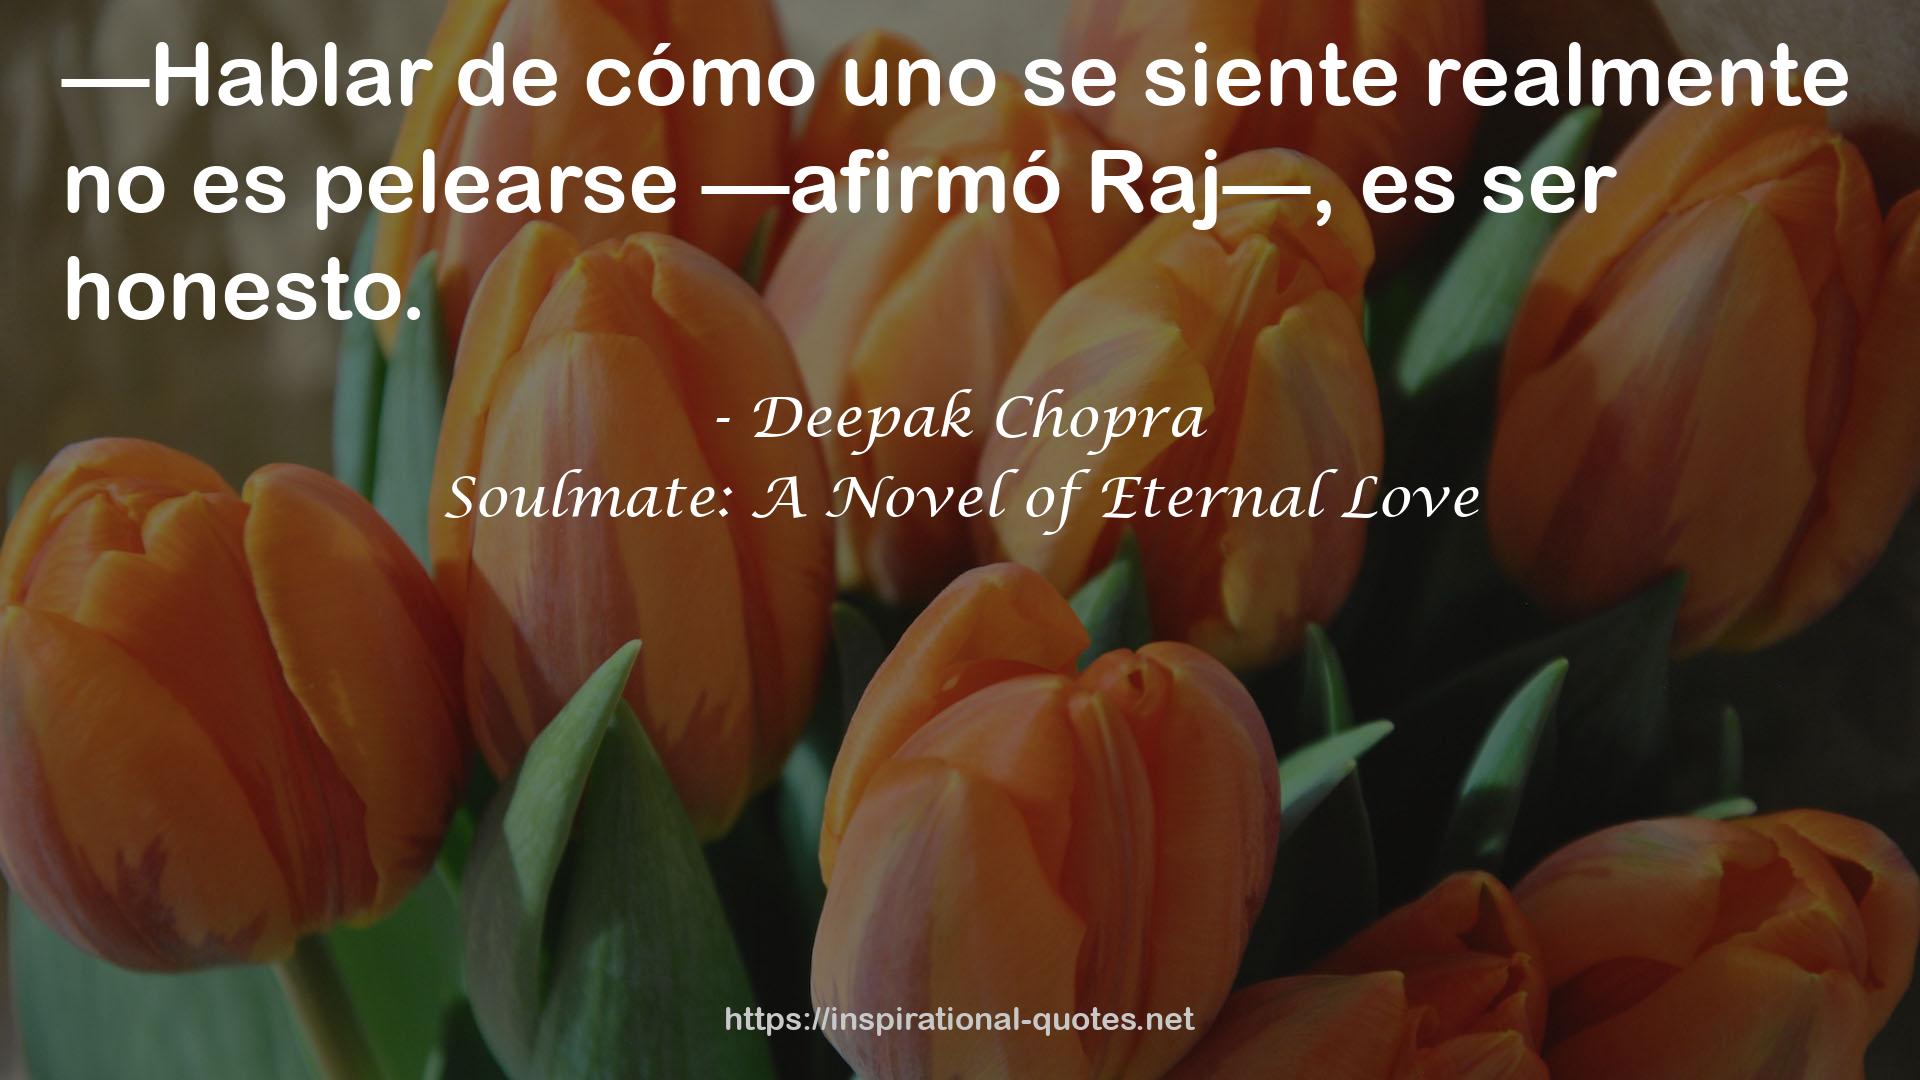 Soulmate: A Novel of Eternal Love QUOTES